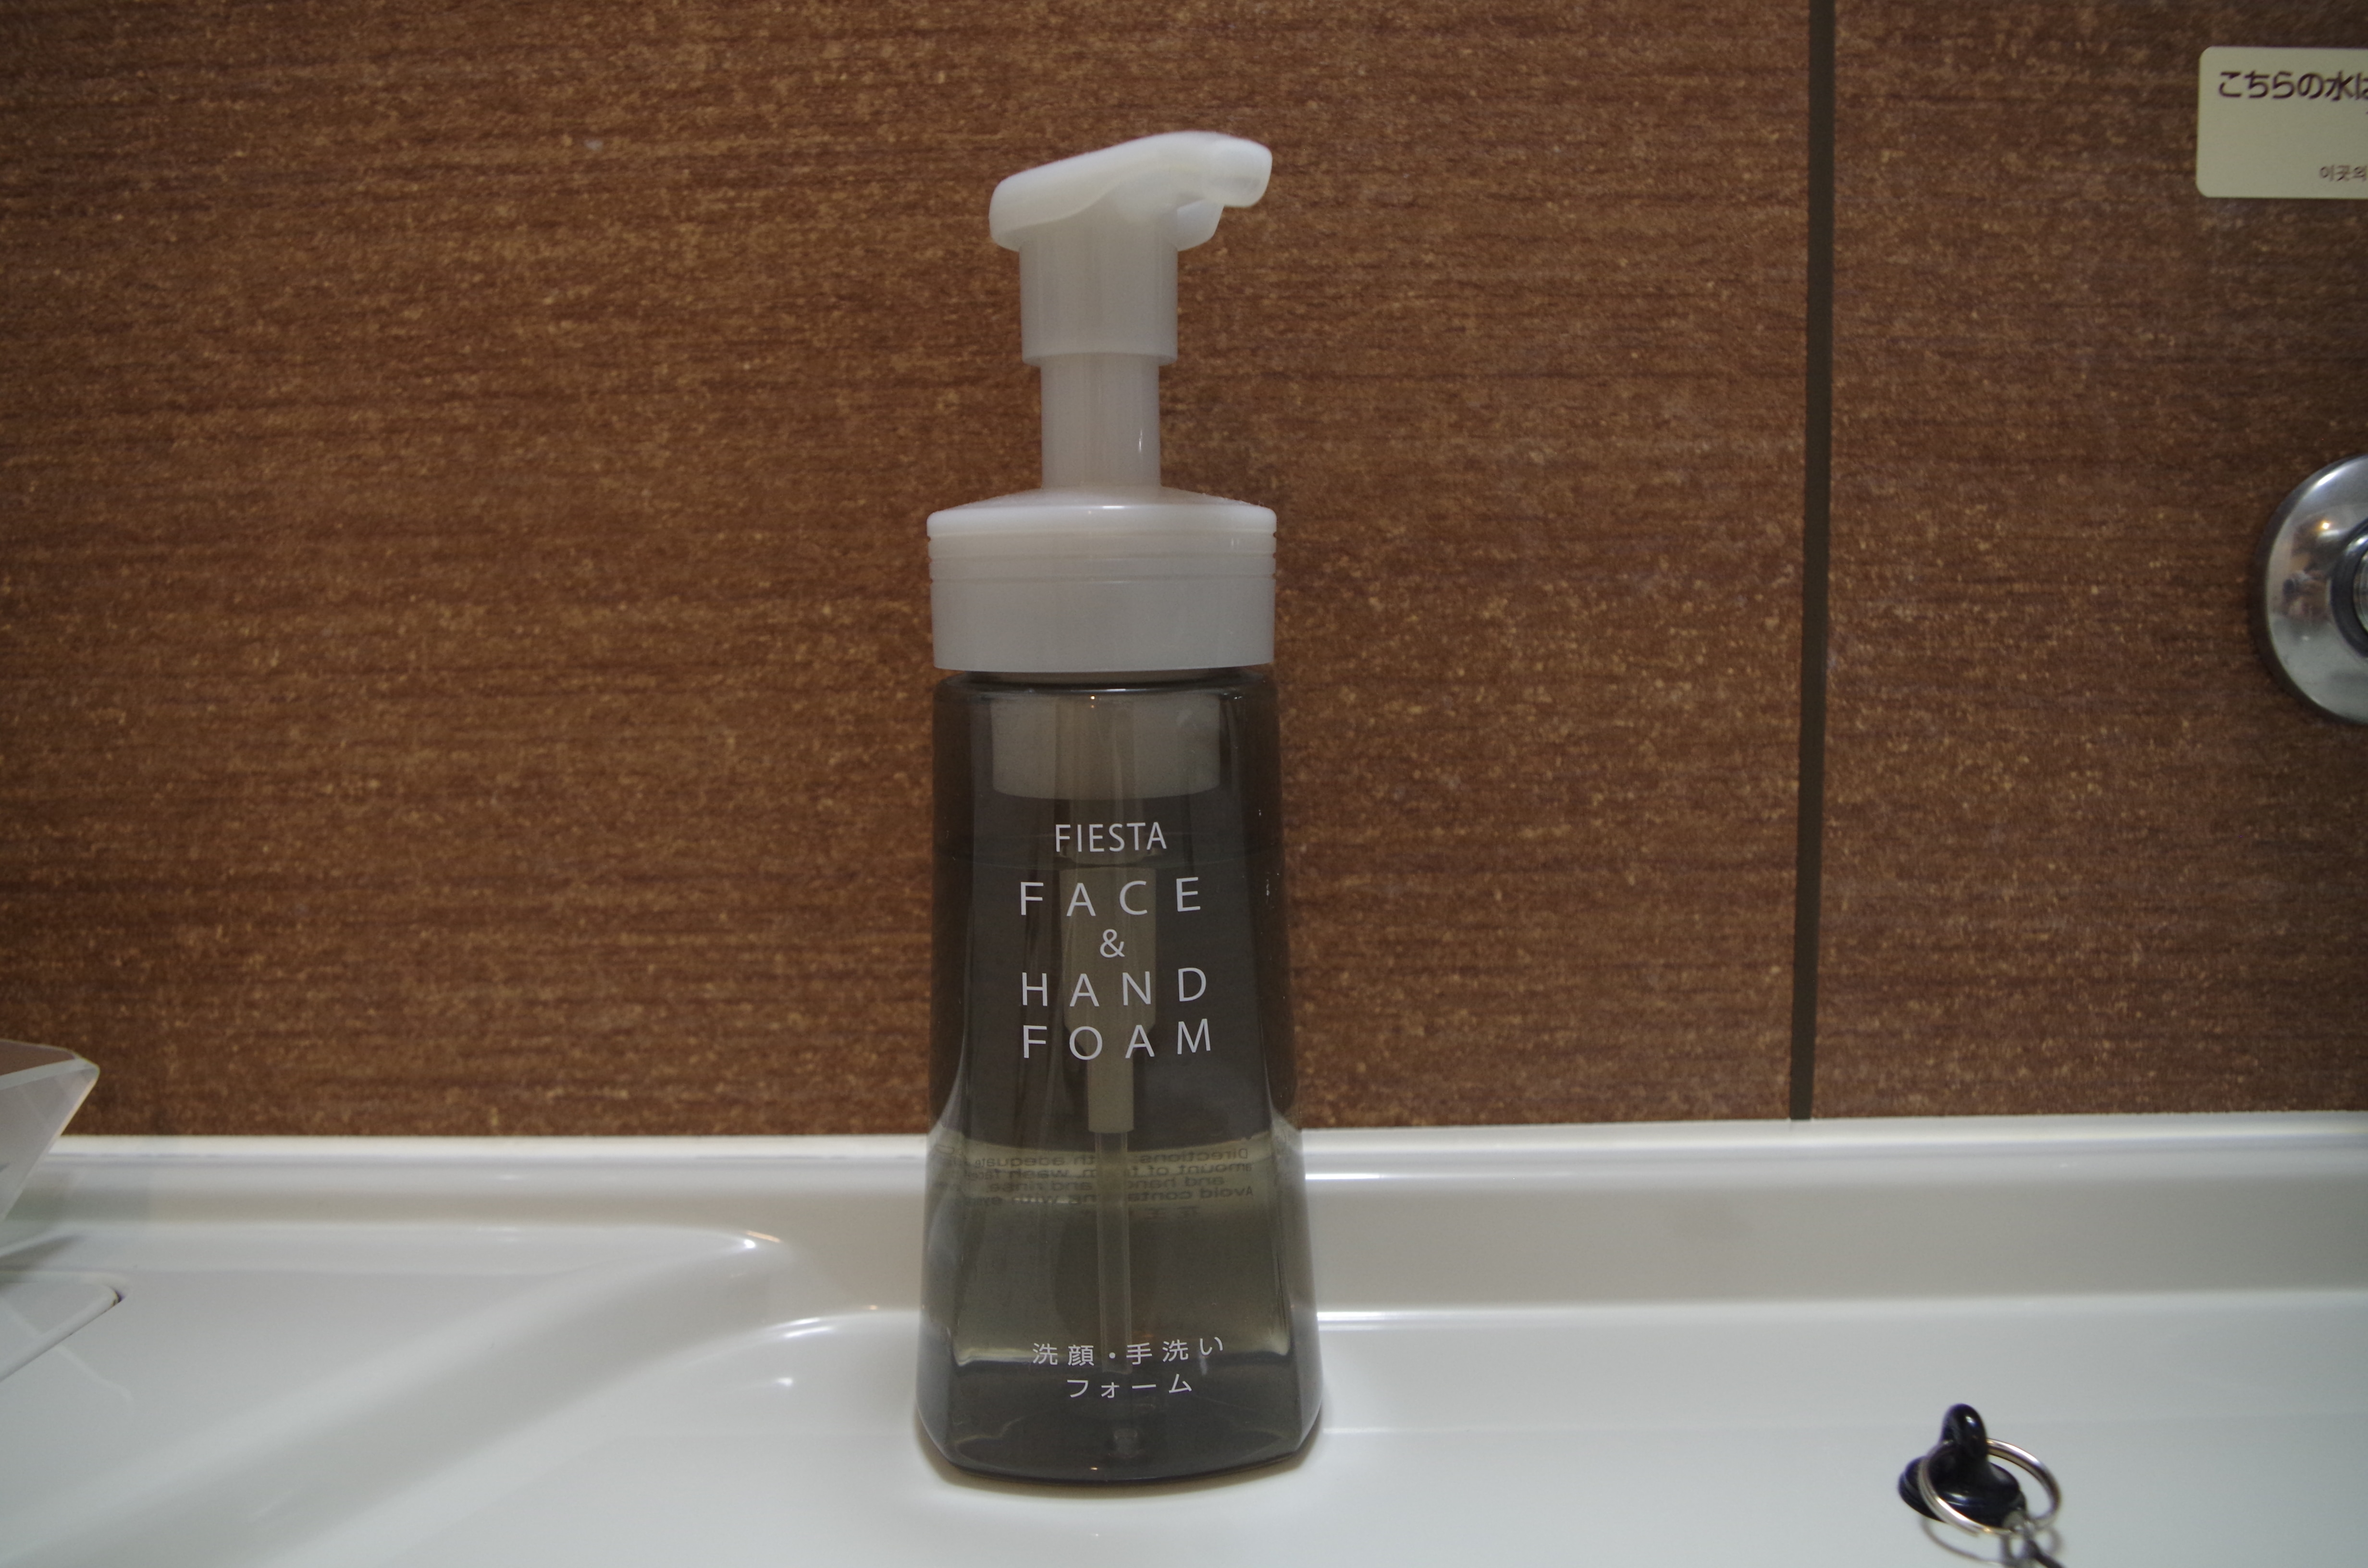 Face wash, hand soap